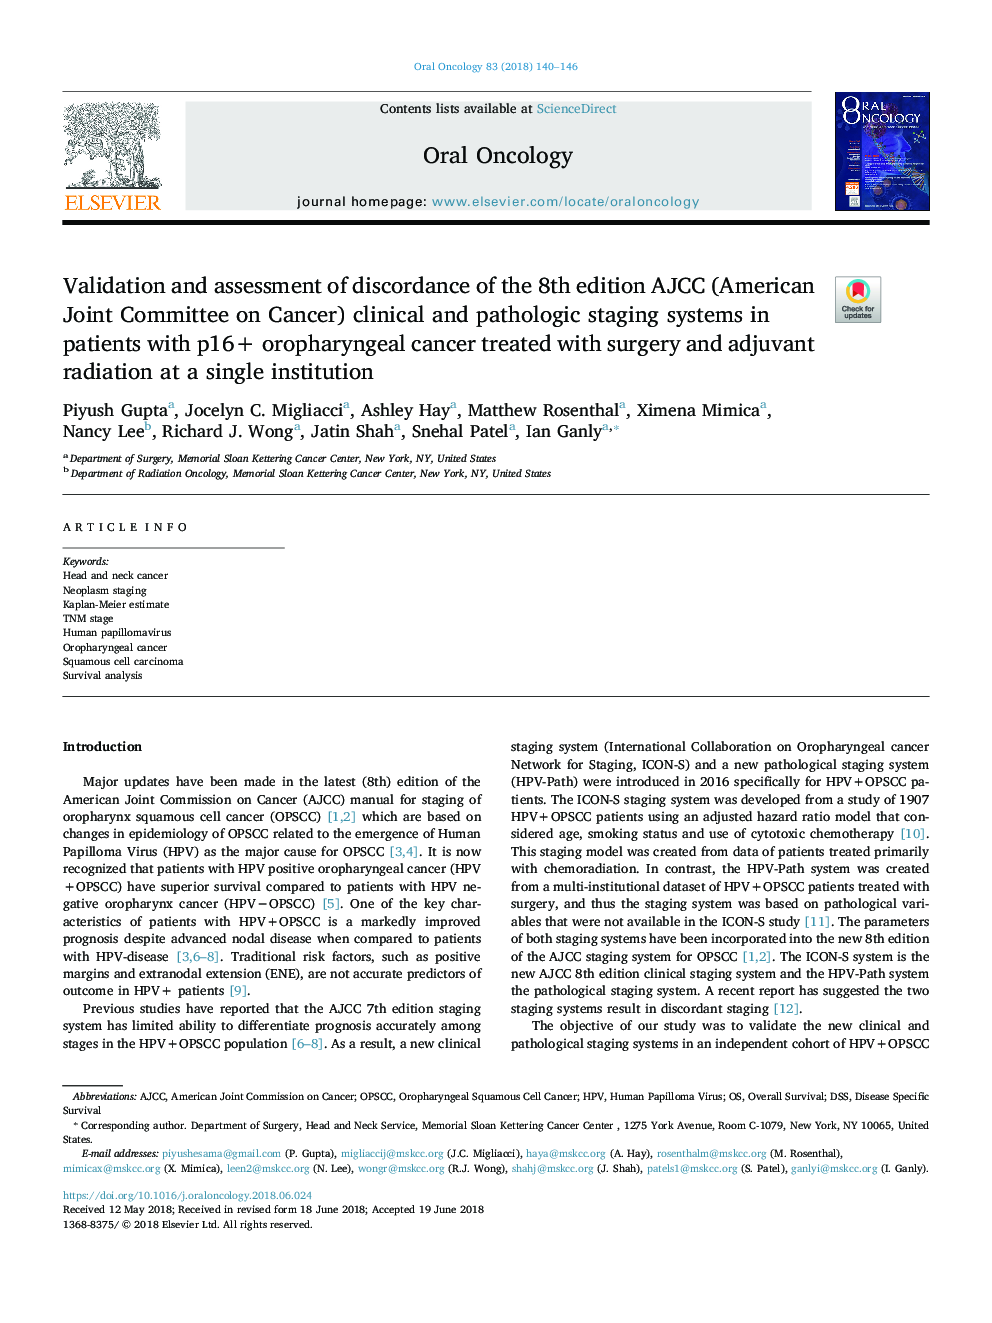 Validation and assessment of discordance of the 8th edition AJCC (American Joint Committee on Cancer) clinical and pathologic staging systems in patients with p16+ oropharyngeal cancer treated with surgery and adjuvant radiation at a single institution